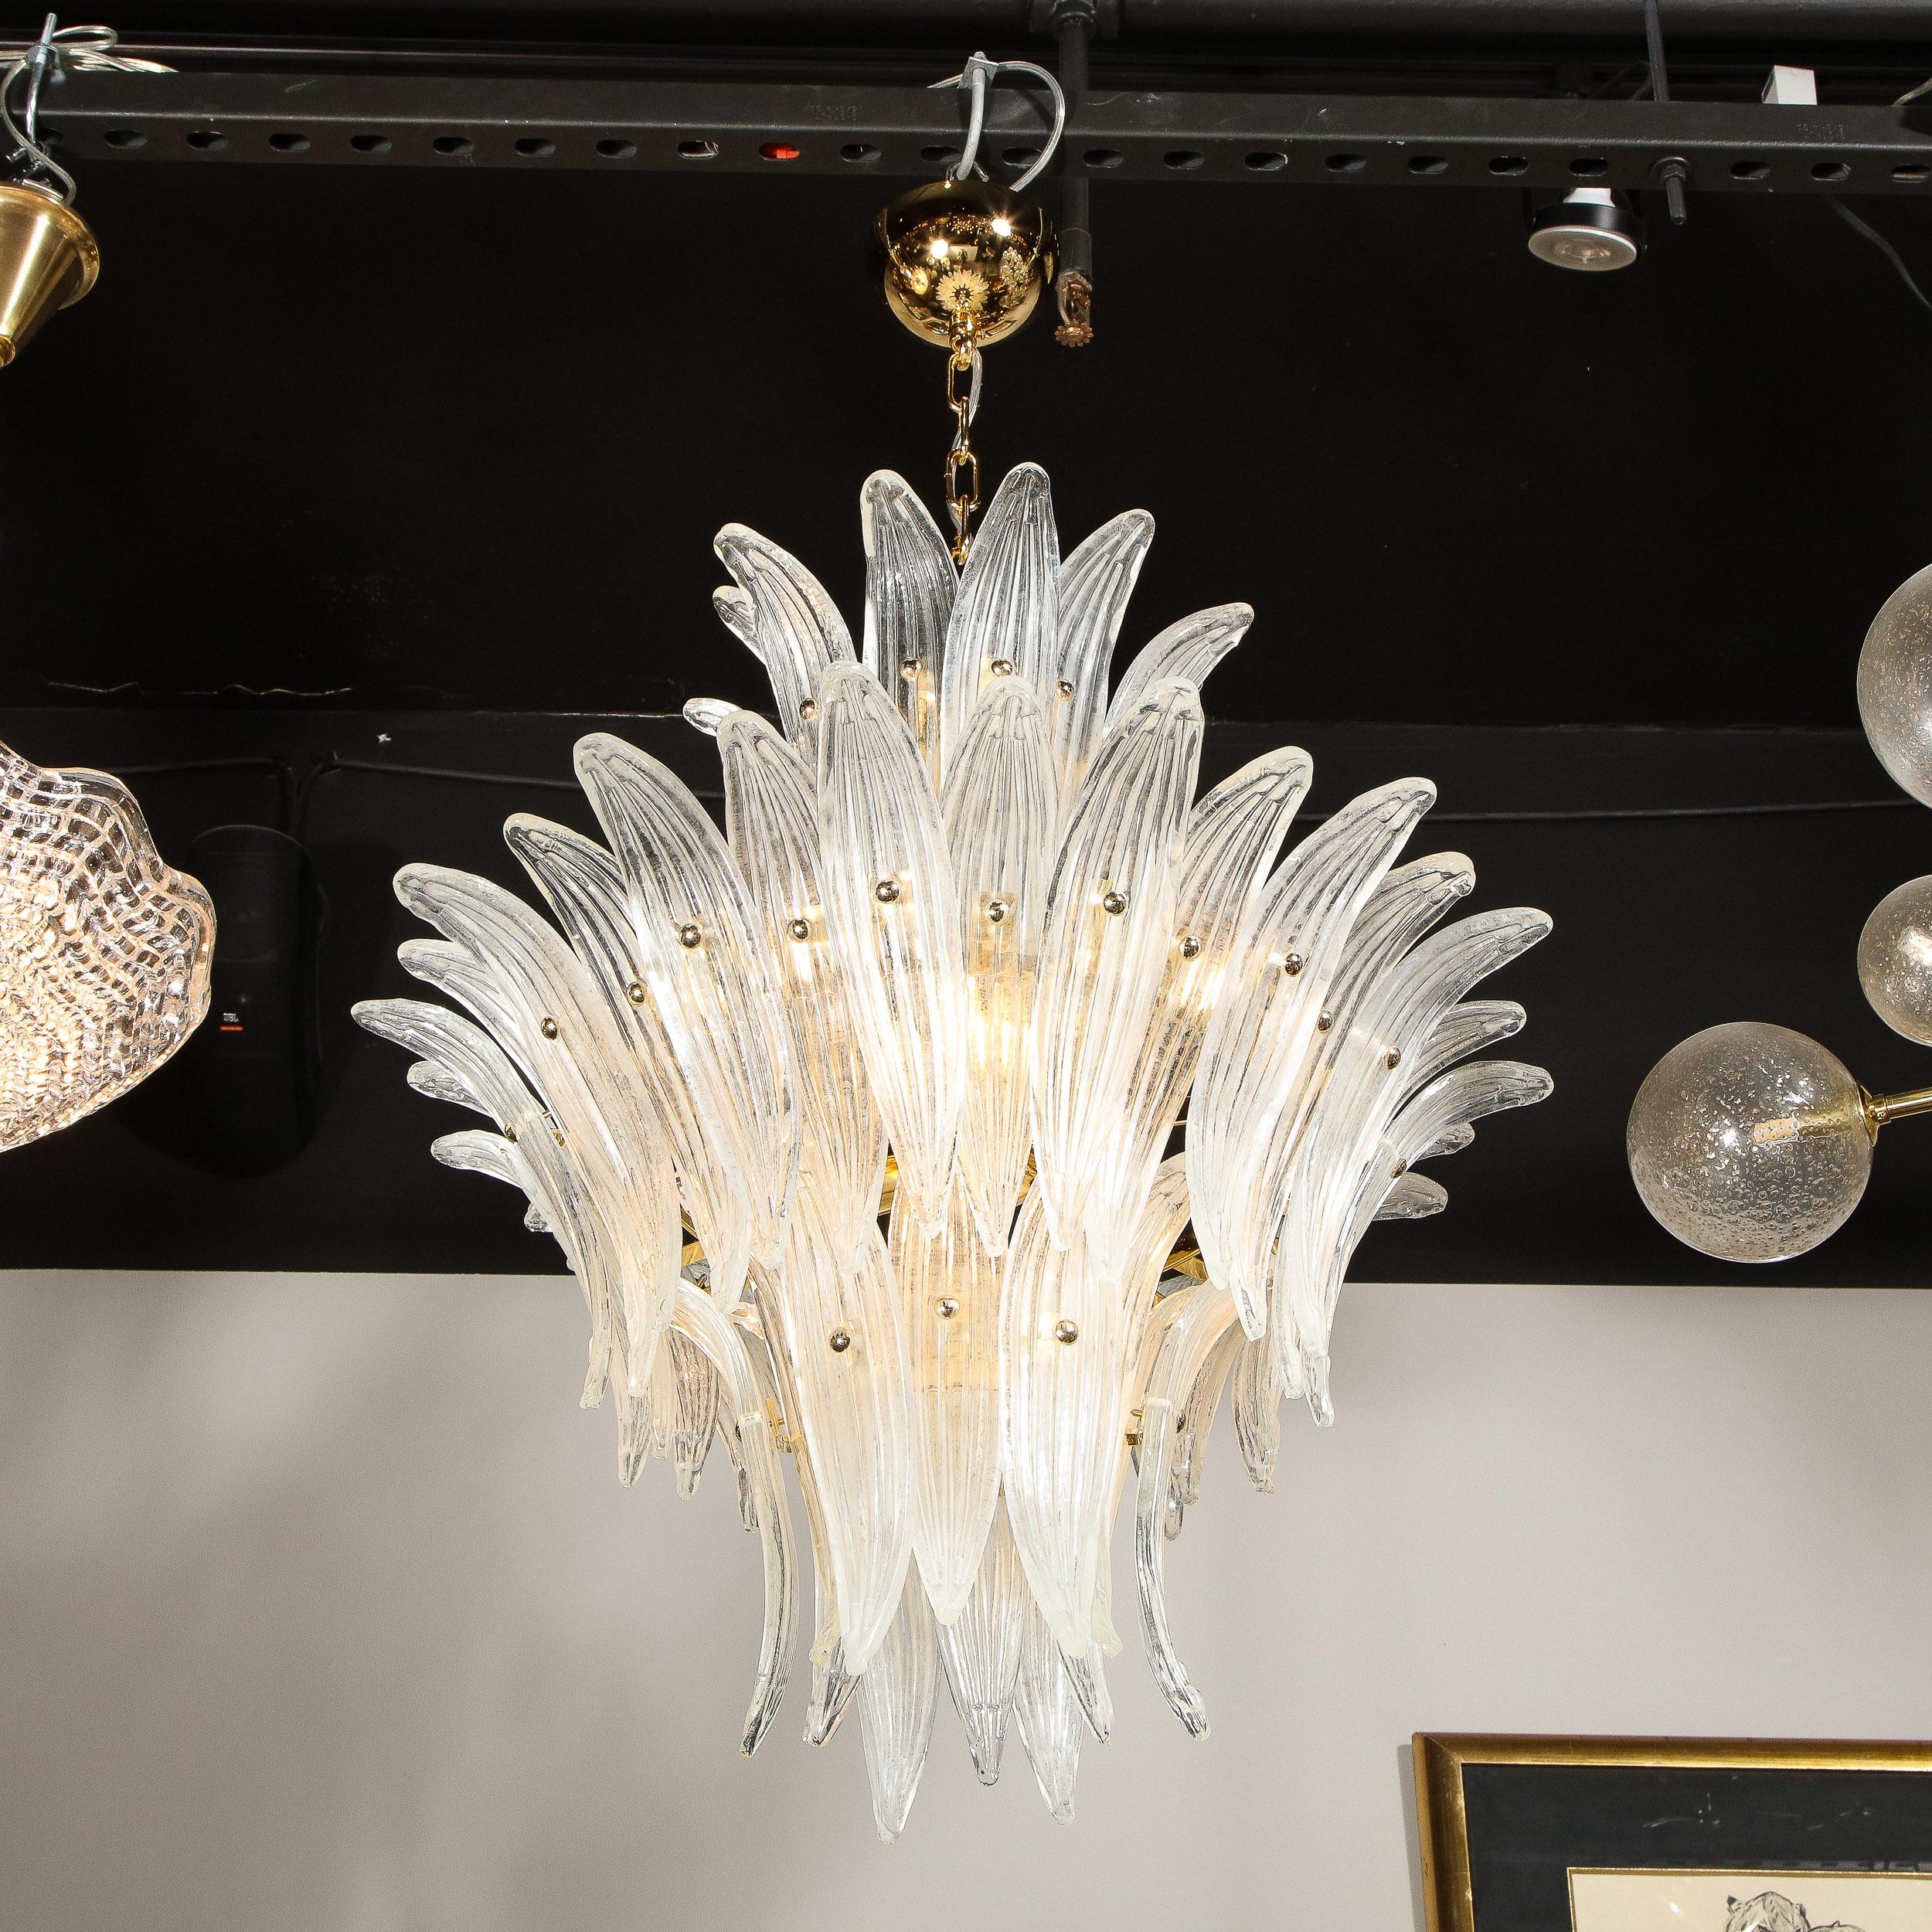 This sophisticated modernist glass chandelier was realized in Murano, Italy- the island off the coast of Venice renowned for centuries for its superlative glass production. It features a body reminiscent of palm leaves and a brass interior that